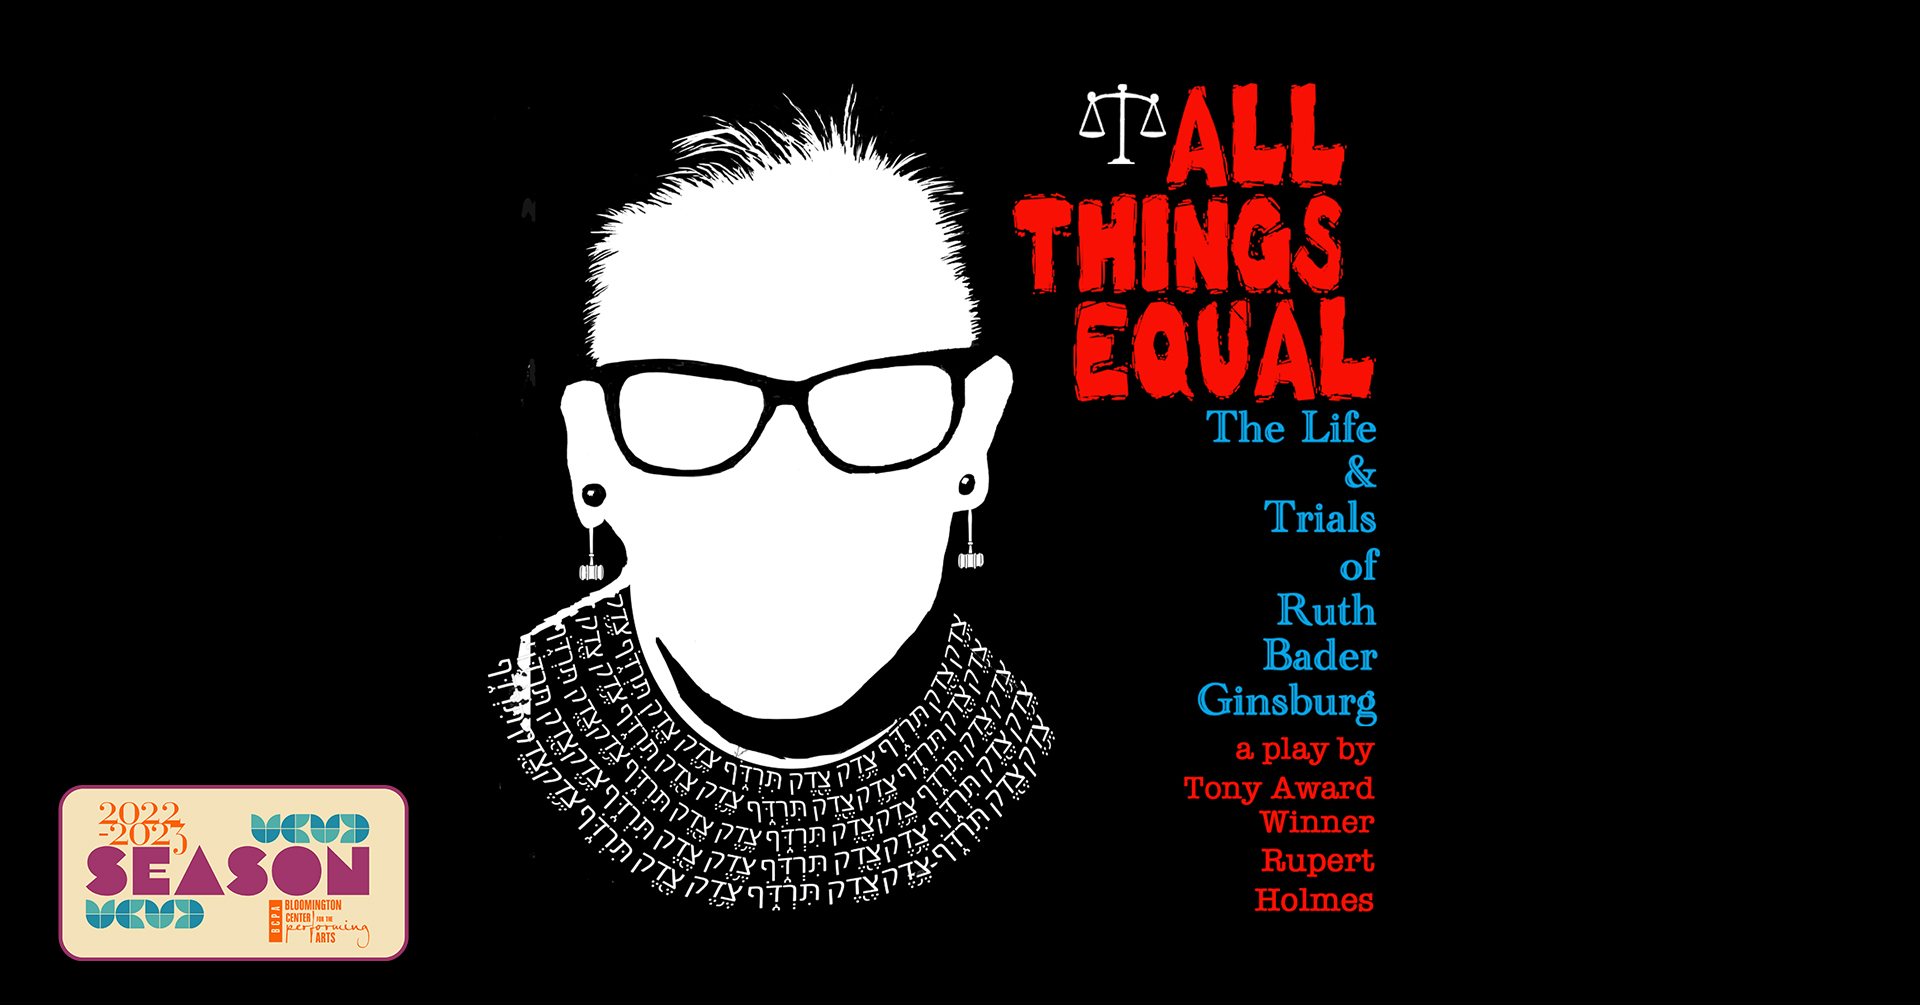 All Things Equal The Life and Trials of Ruth Bader Ginsburg